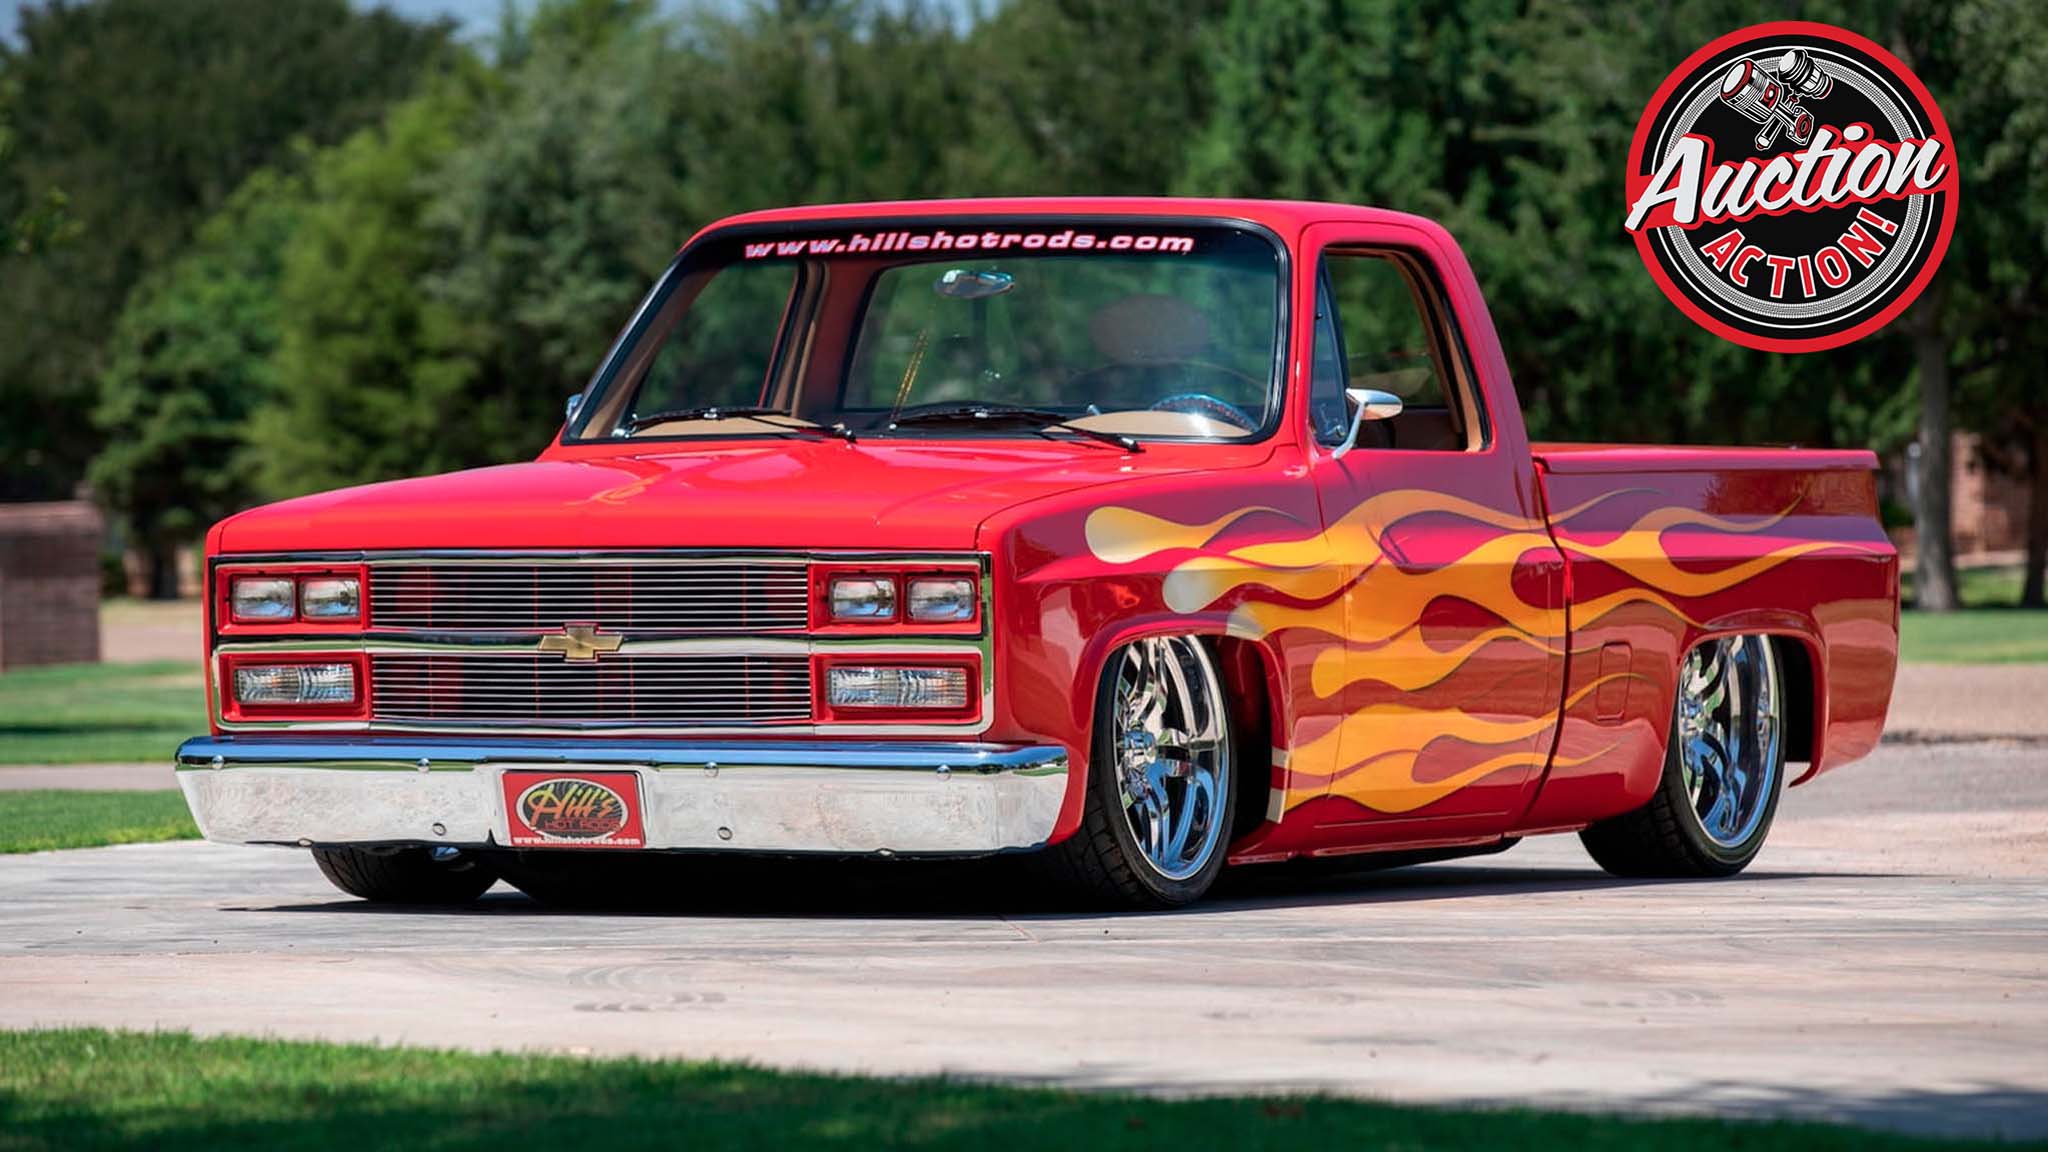 Dallas, Texas: Square Body Chevy C10 Pickups With No Reserve